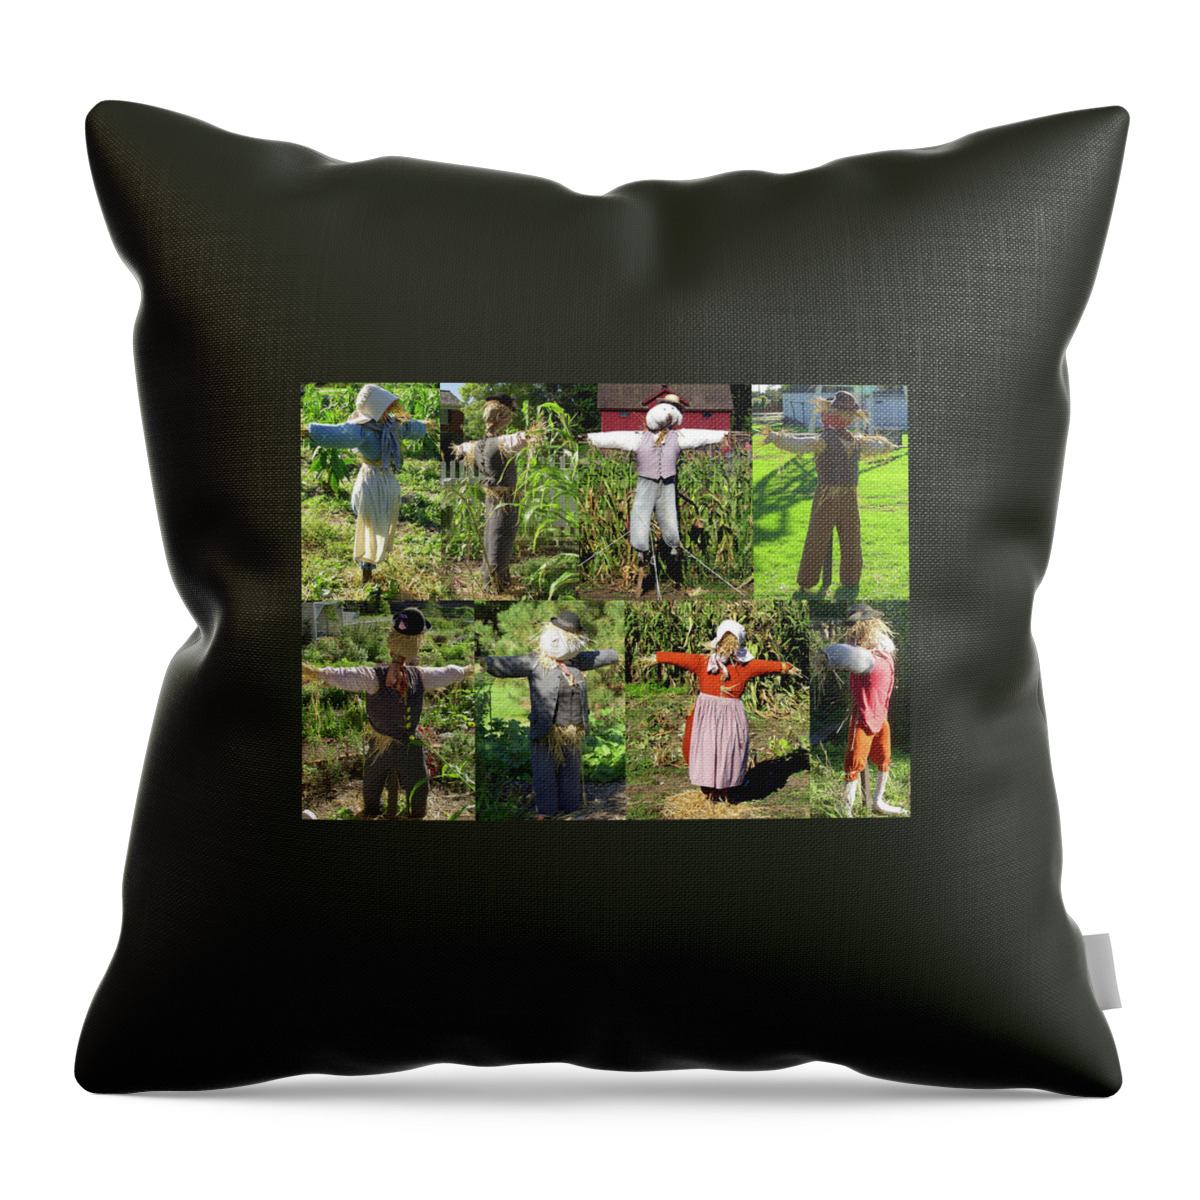  Throw Pillow featuring the photograph A Not So Scary Family by Rein Nomm